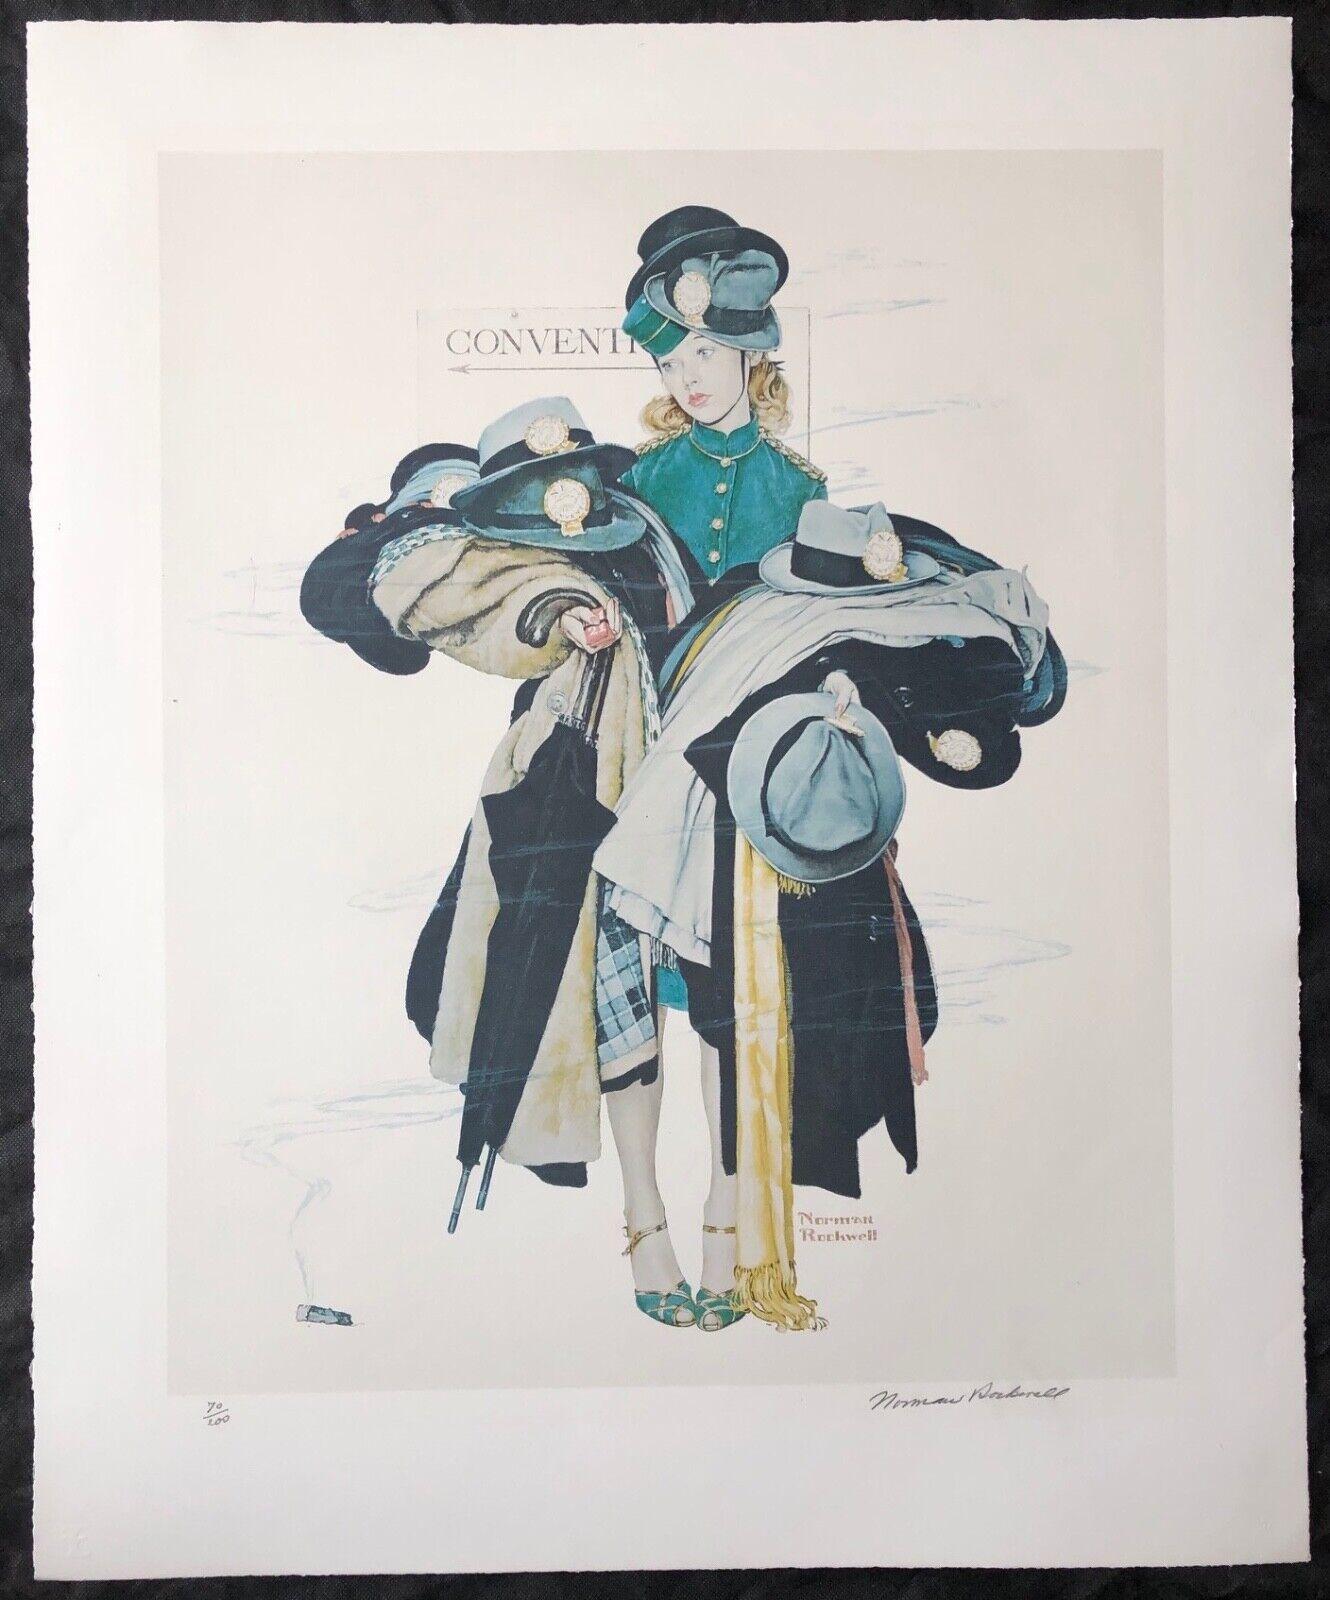 Offered at an exceptional price, this piece is in excellent condition and will ship rolled. Edition number 70 / 200.  

There are 200 pieces in the edition all signed and numbered by Norman Rockwell.
Published 1976, Gallery Retail $6,000.